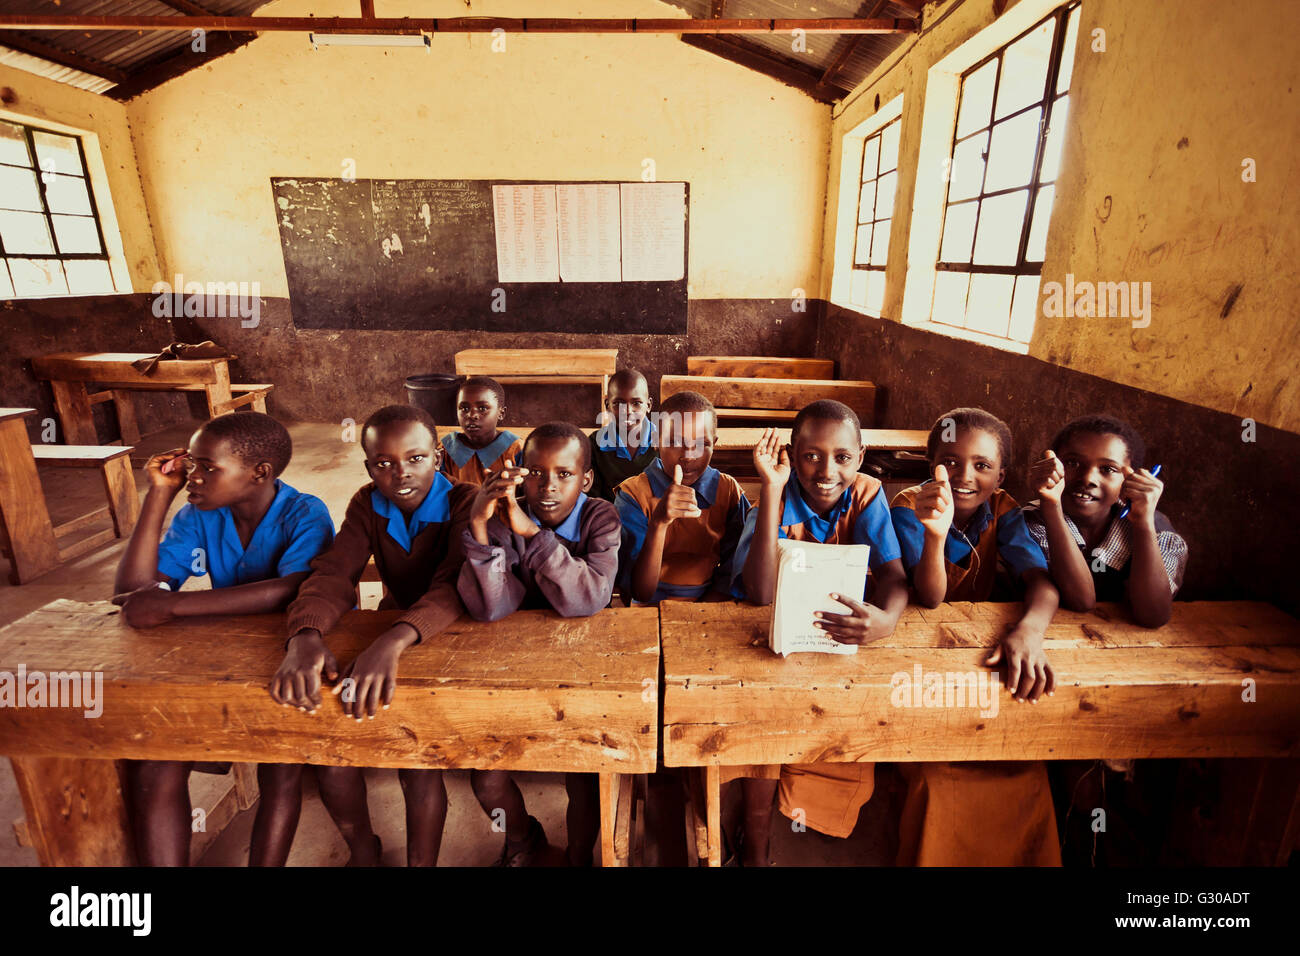 Primary school of the Leparua people, providing education as well as medication, Kenya, East Africa, Africa Stock Photo